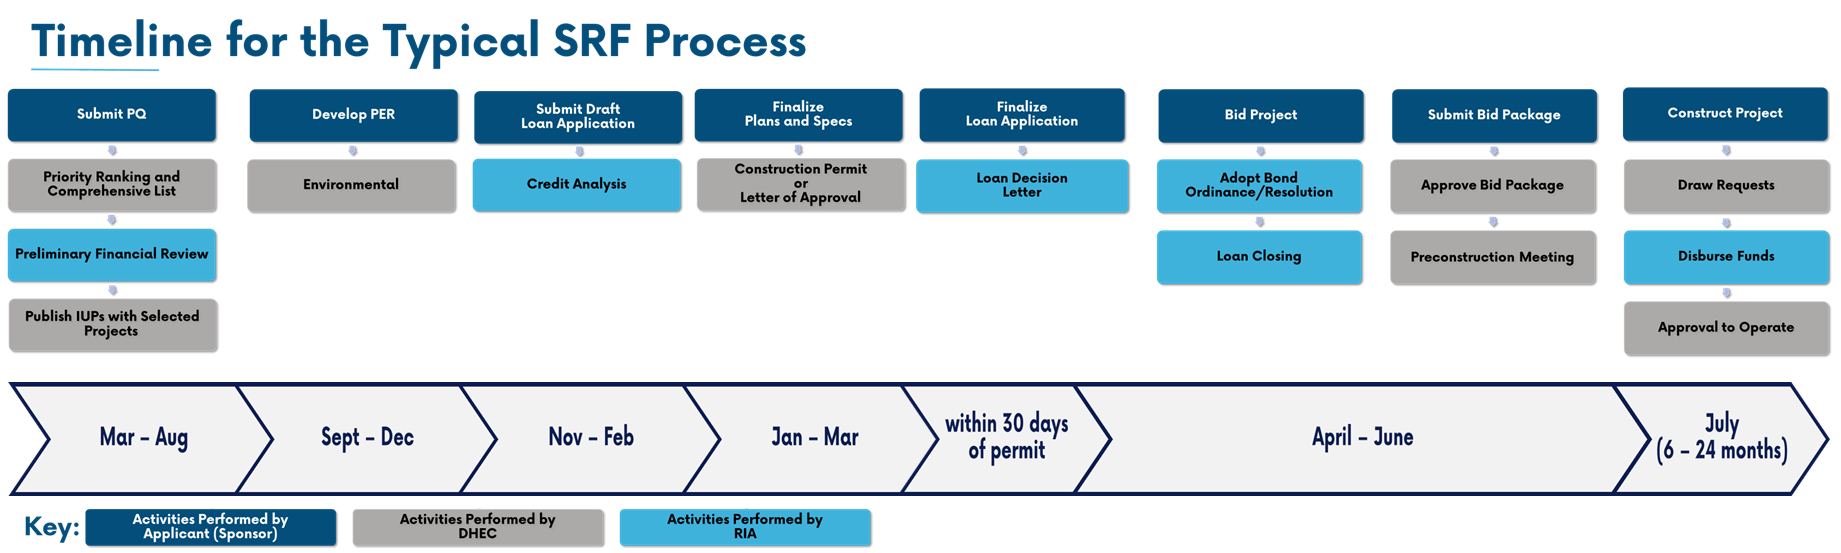 Timeline for the Typical SRF Process